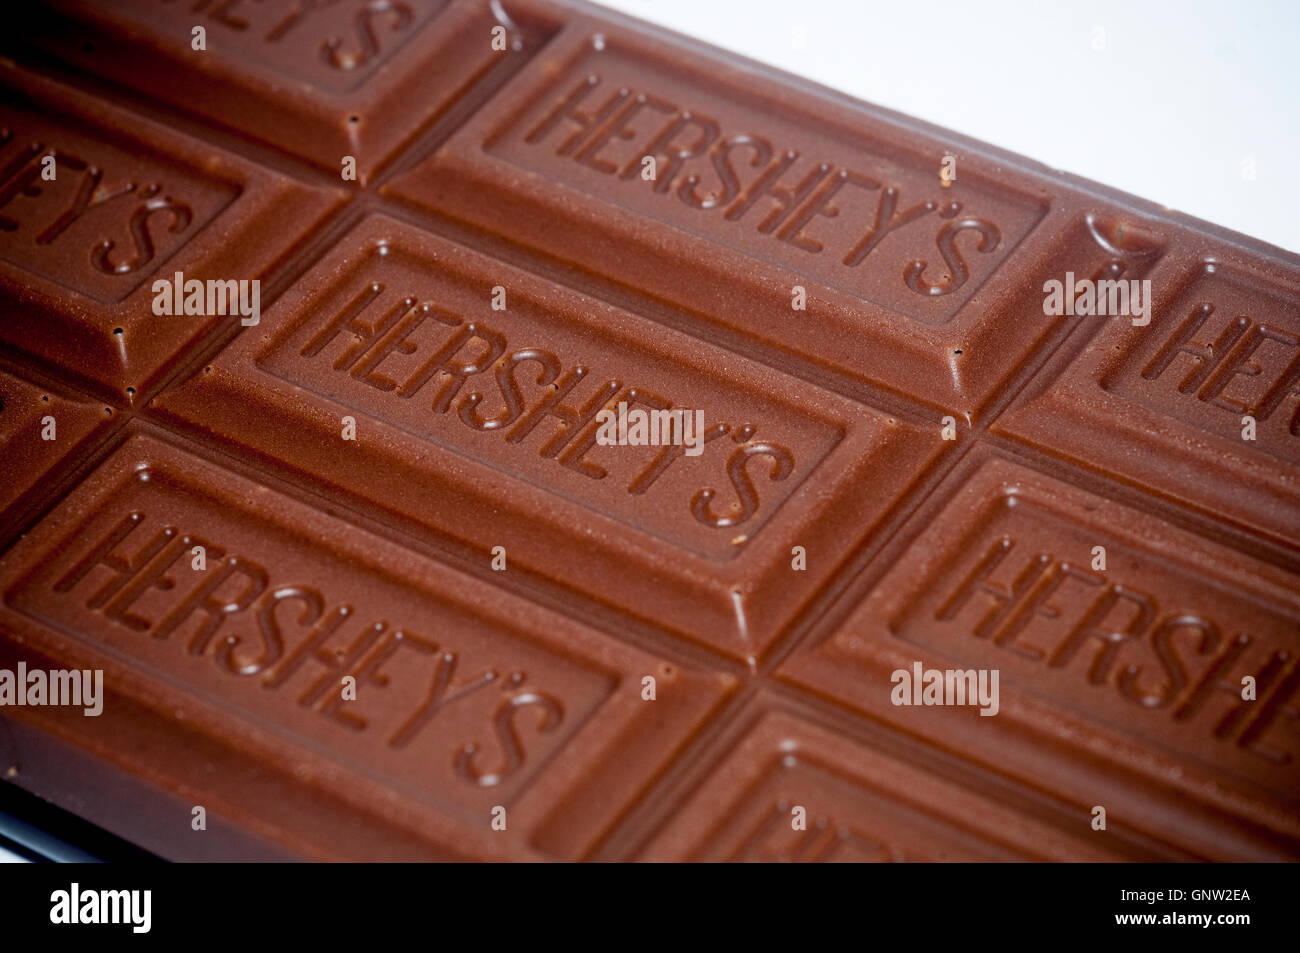 A Hershey's chocolate bar in New York on Wednesday, August 31, 2016.  Mondelez International has walked away from its bid for the Hershey Co. Media reports that Mondelez may now be the target of a takeover, possibly from Kraft Heinz. (© Richard B. Levine) Stock Photo